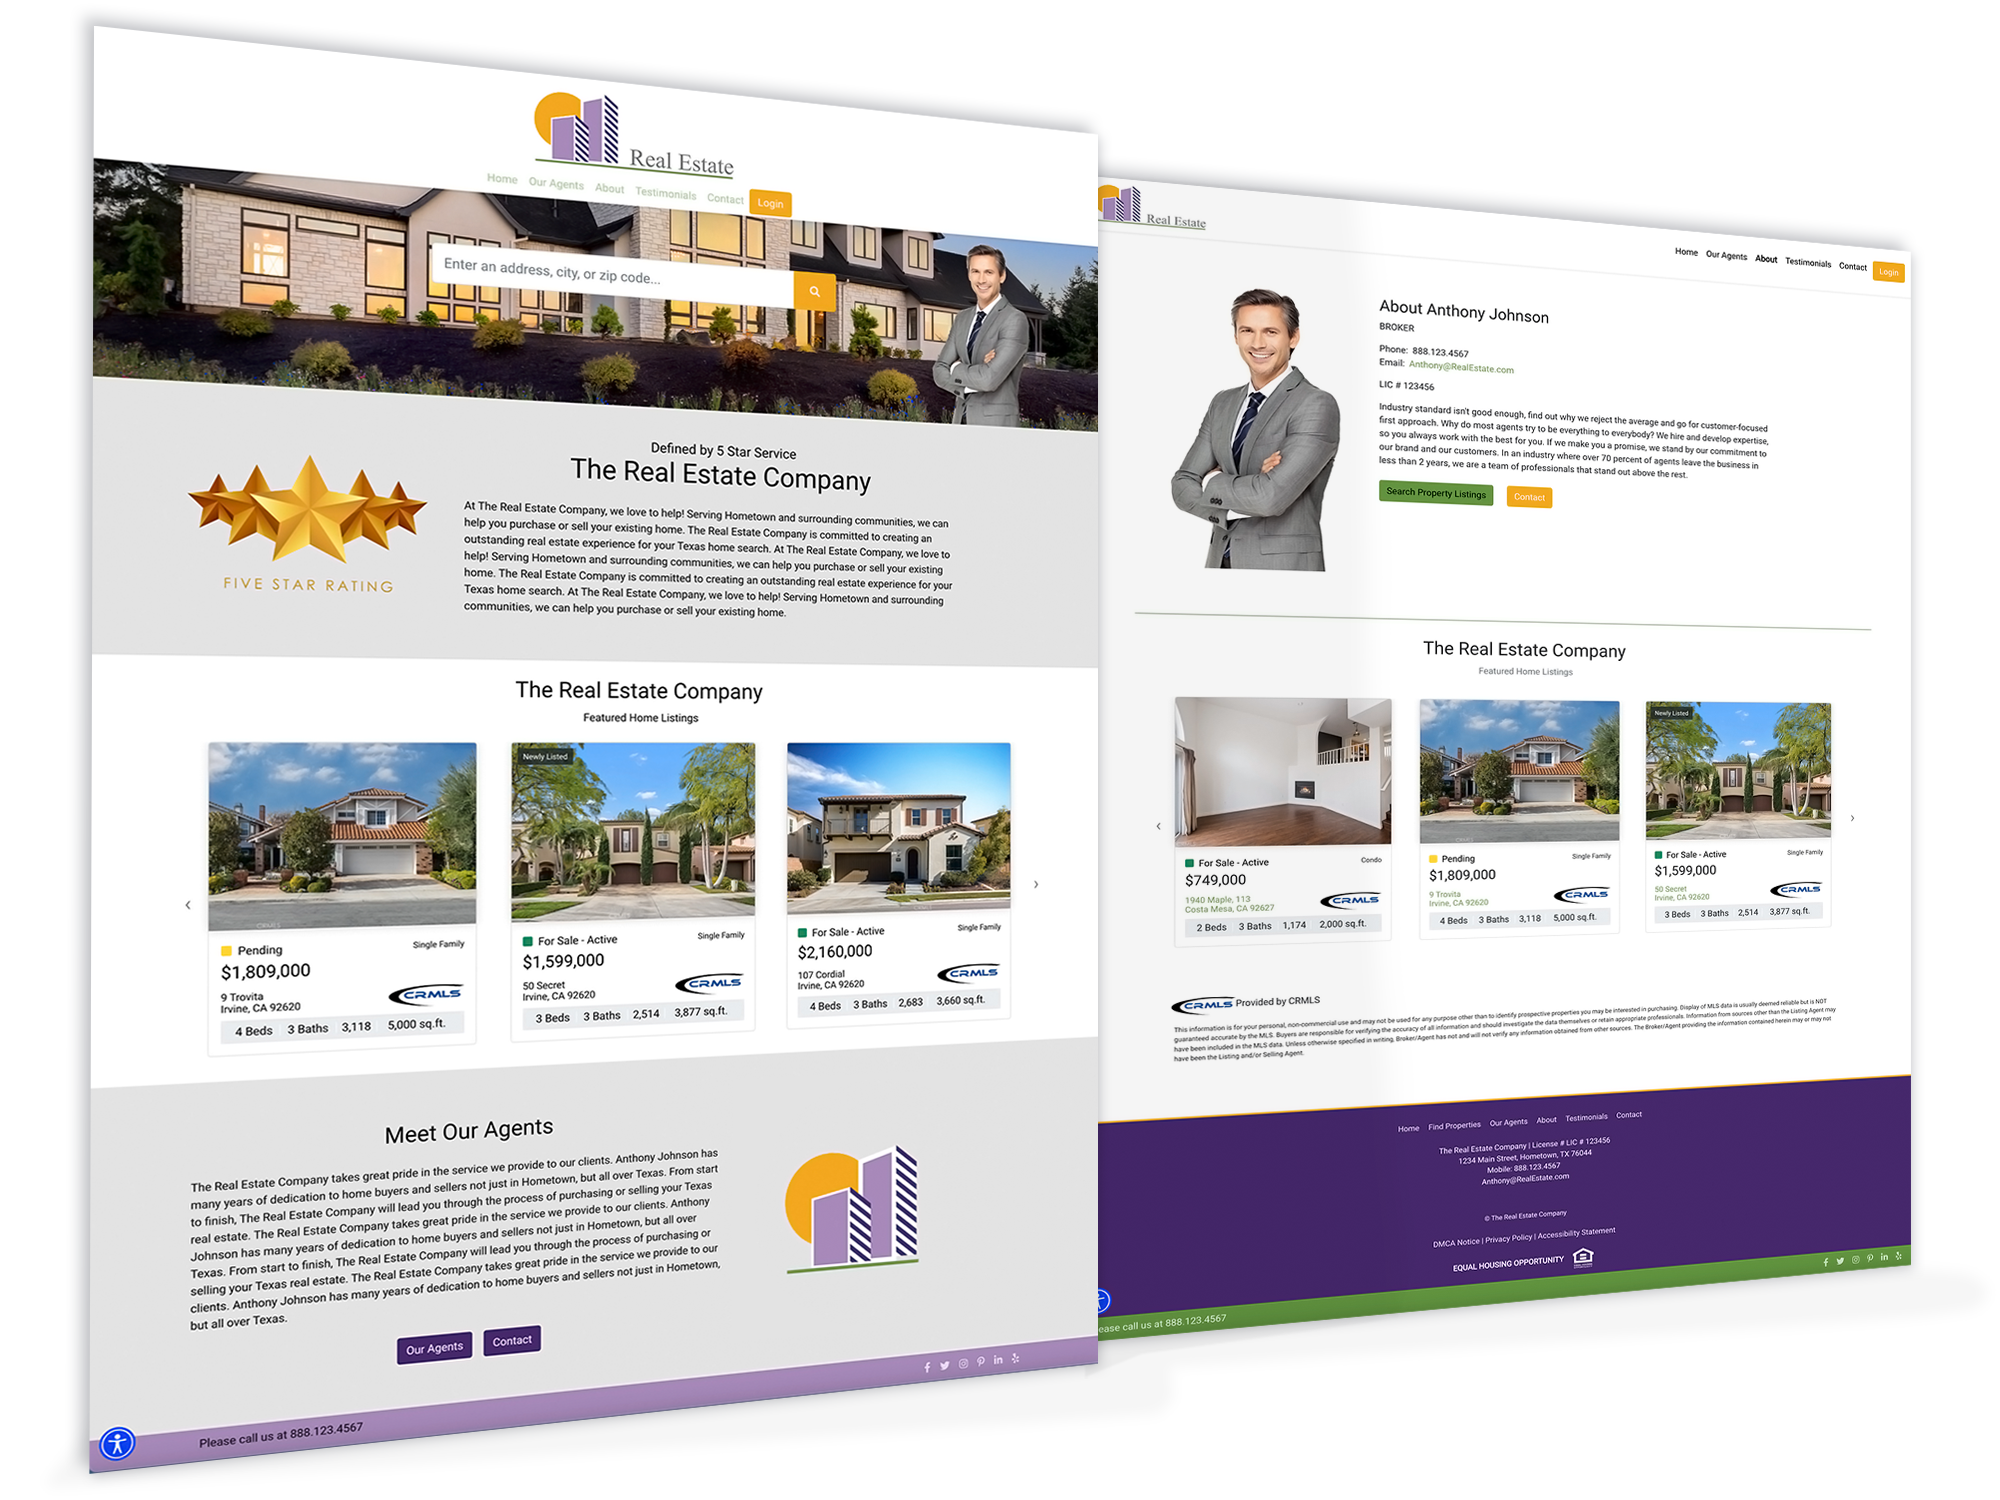 OSI IDX makes it easy to build a beautiful website for your real estate business